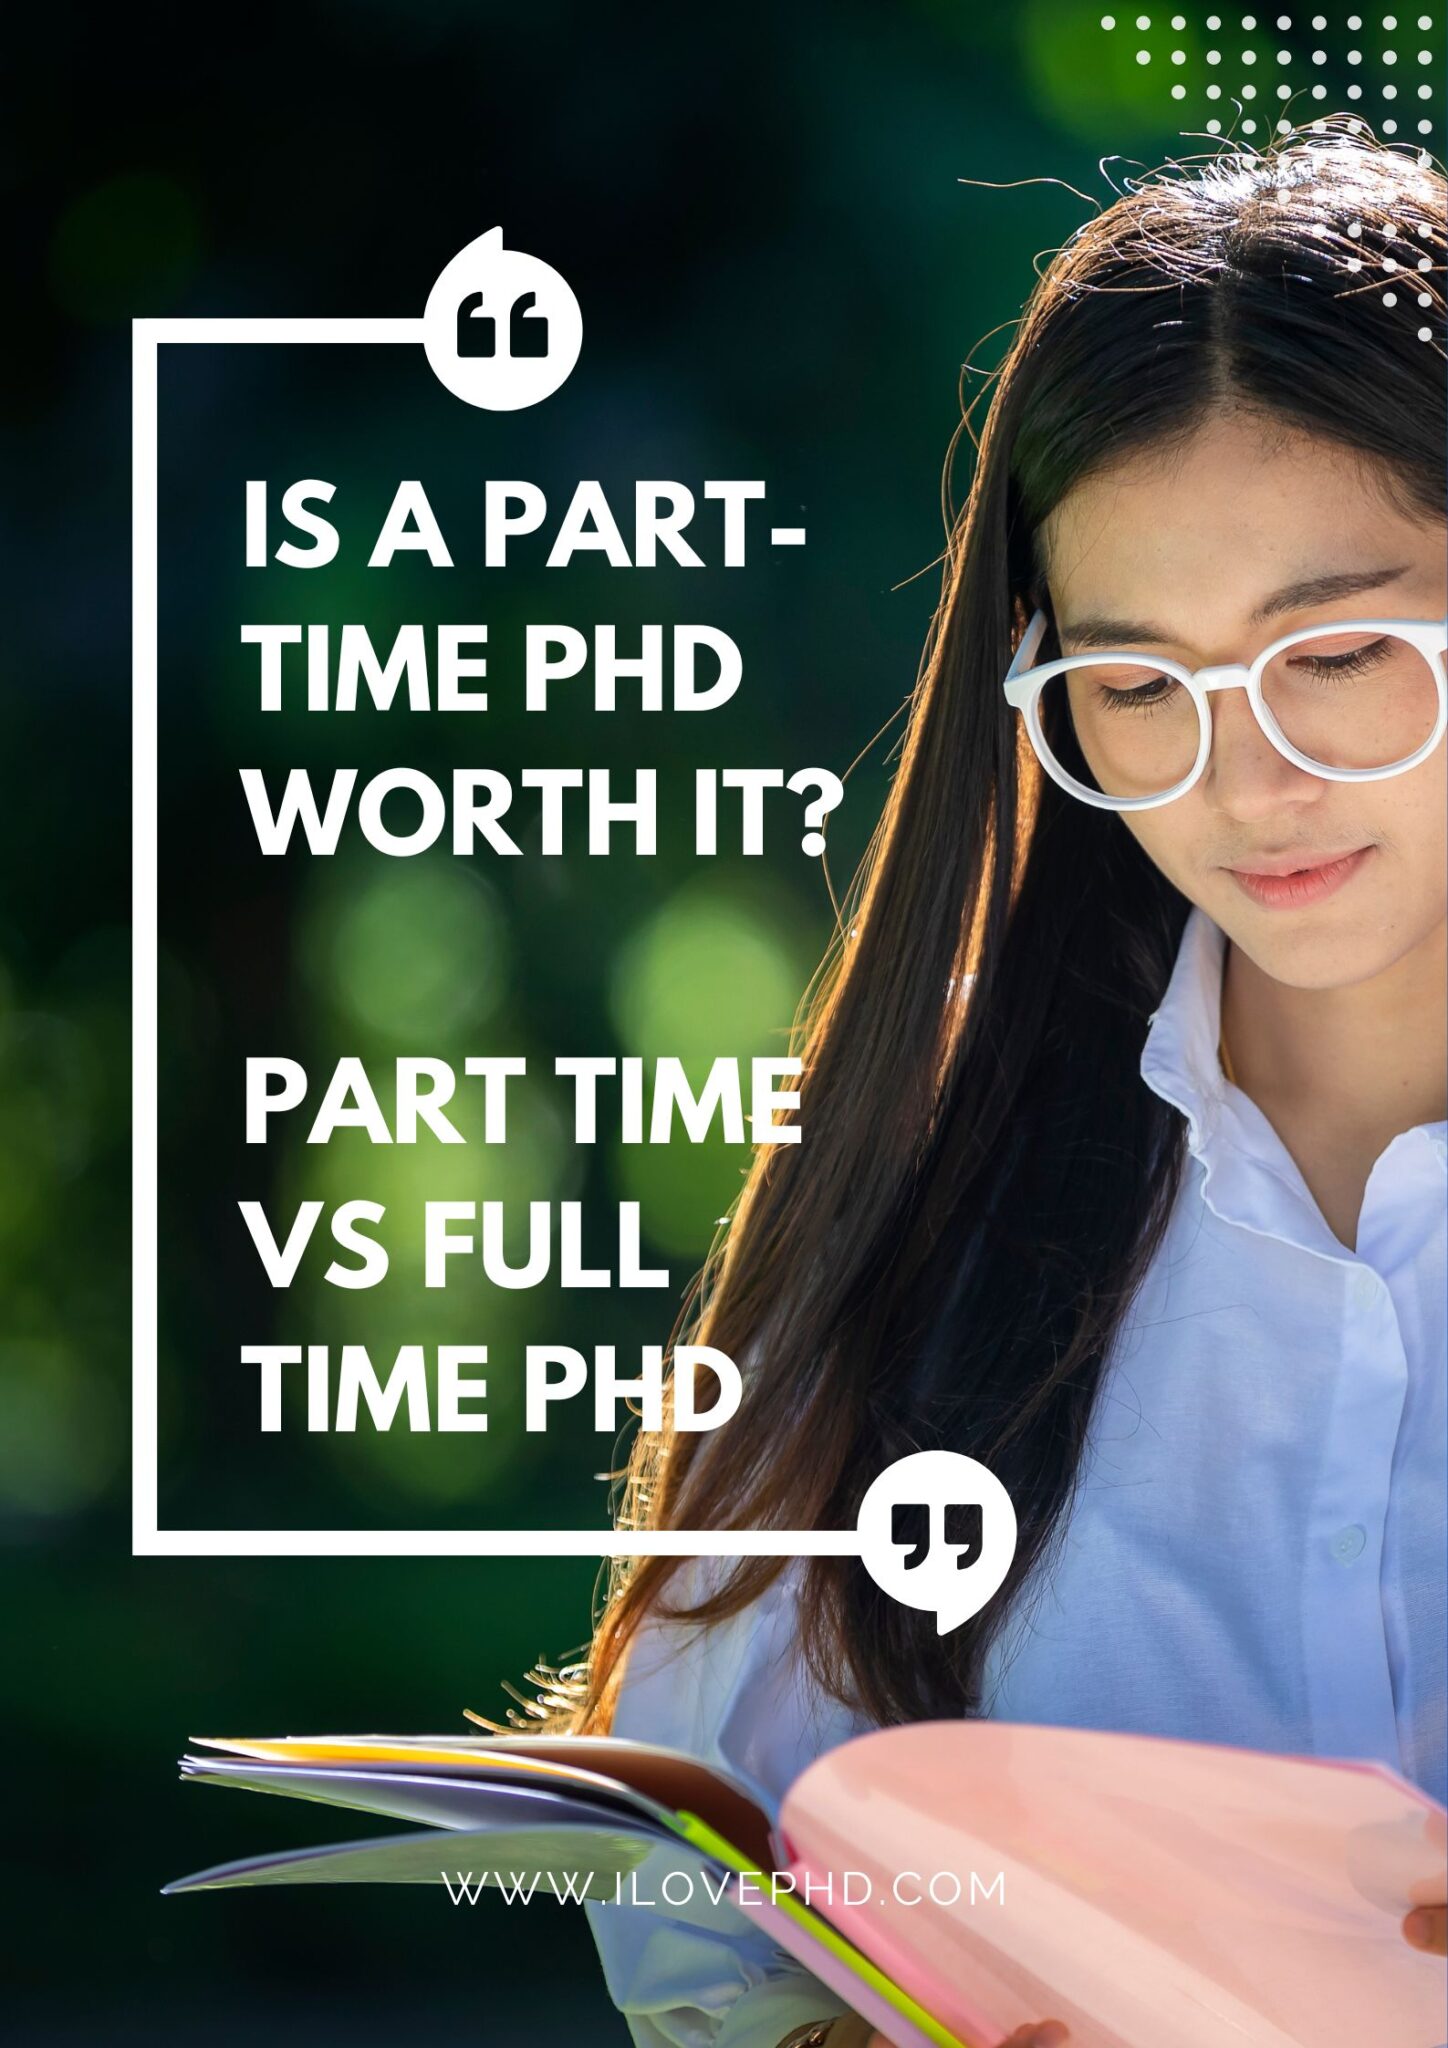 doing a phd part time reddit